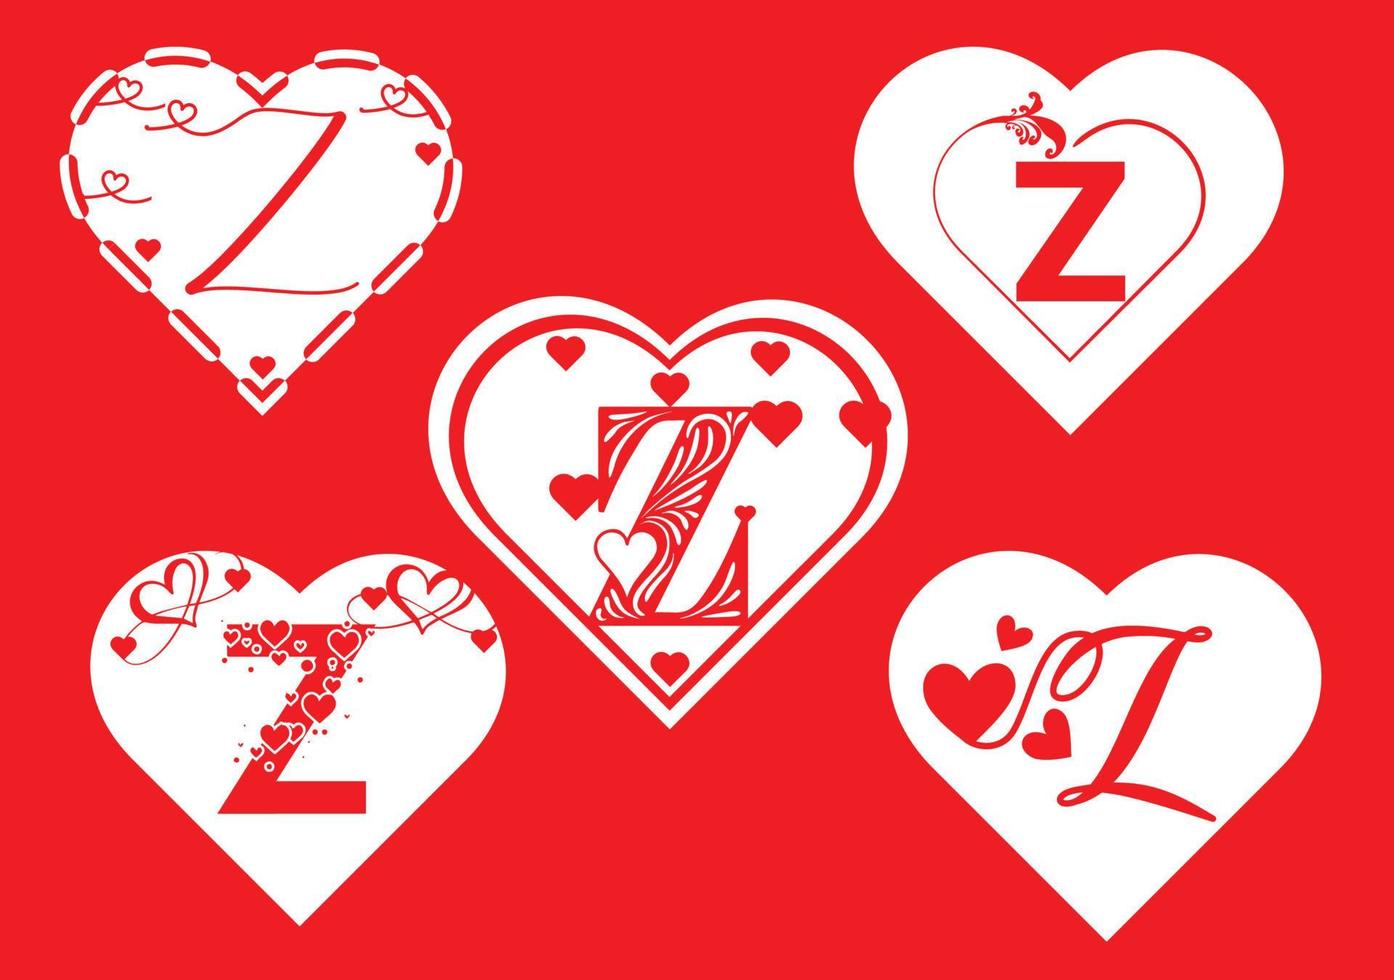 Z letter logo with love icon, valentines day design template ...